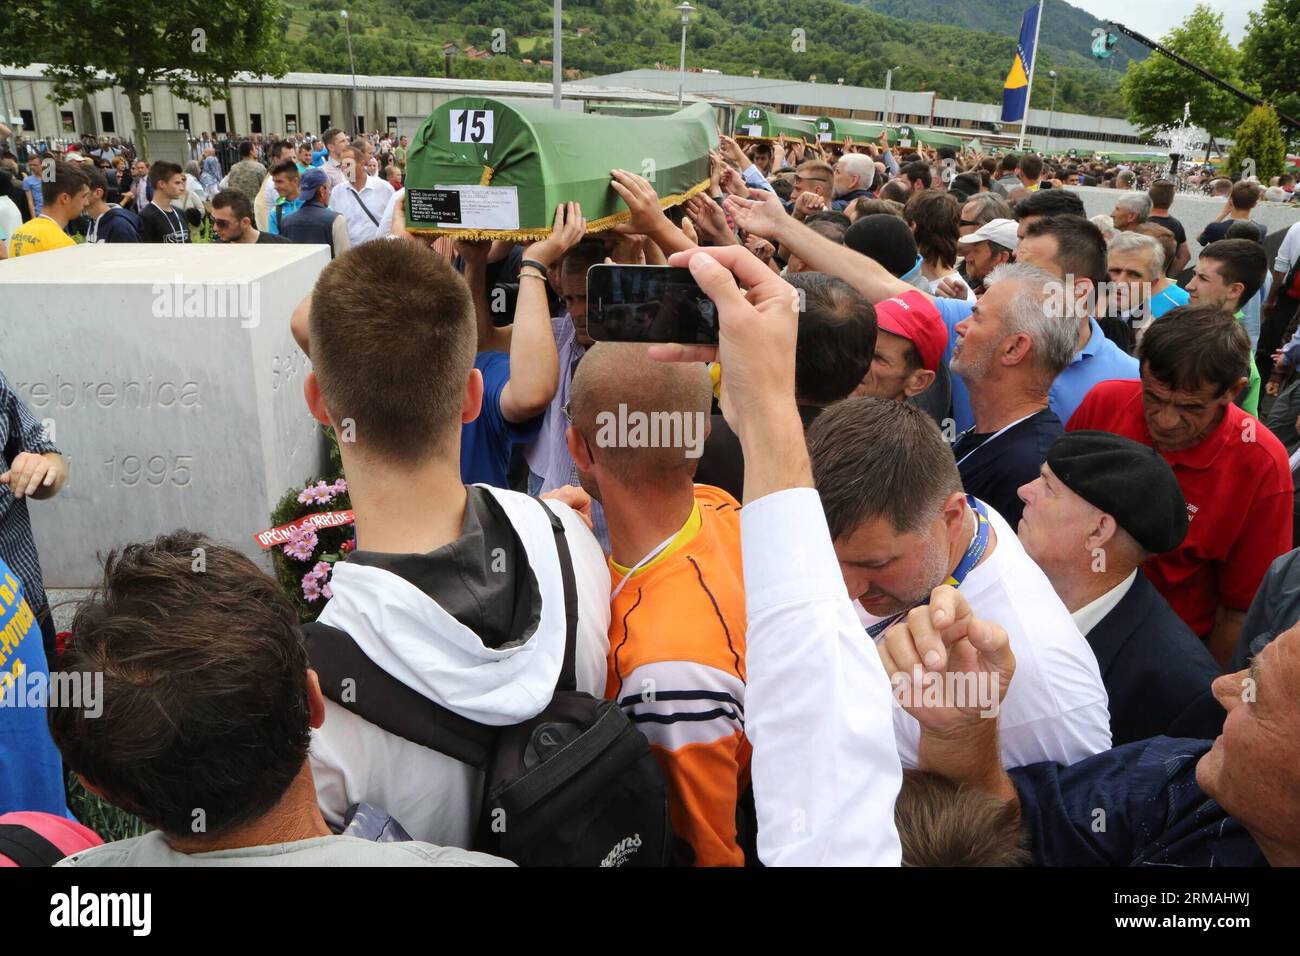 People carry coffins of victims during a funeral in Potocari, near Srebrenica, Bosnia and Herzegovina, July 11, 2014. The funeral of 175 recently identified victims was held here Friday to commemorate the 19th anniversary of the Srebrenica massacre. Some 7,000 Muslim men and boys were massacred in and near Srebrenica by Bosnian Serb forces in July 1995, the worst massacre in Europe since the end of World War II. (Xinhua/Haris Memija) (zjl) BIH-SREBRENICA-MASSACRE-19TH ANIVERSARY PUBLICATIONxNOTxINxCHN   Celebrities Carry Coffin of Victims during a Funeral in  Near Srebrenica Bosnia and Herzego Stock Photo